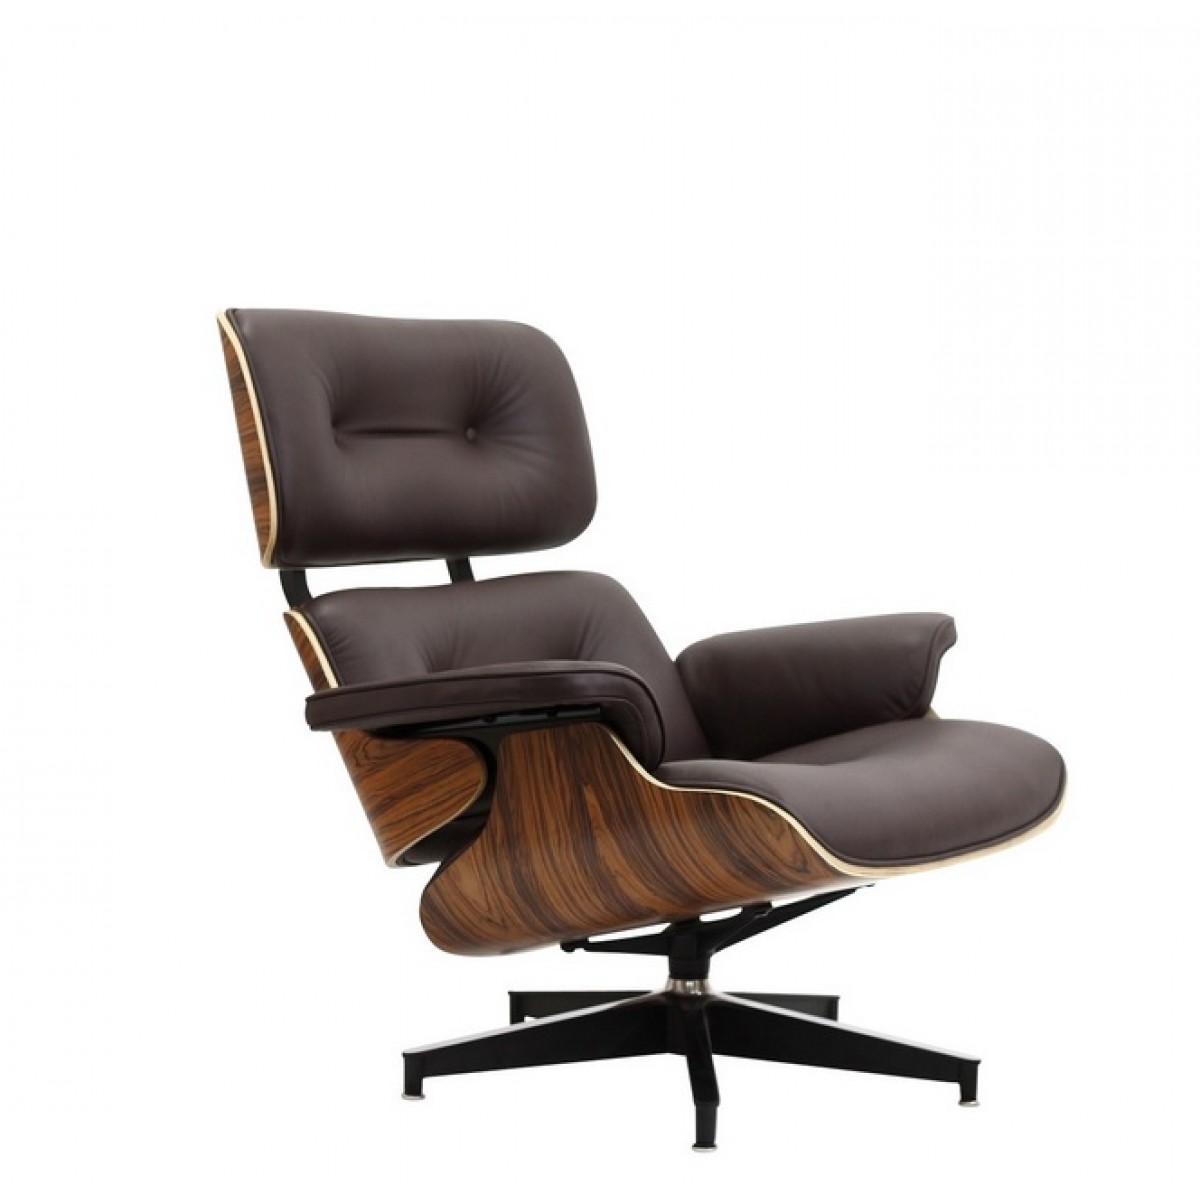 Eames Style Lounge Chair and Ottoman Brown Leather Walnut Wood